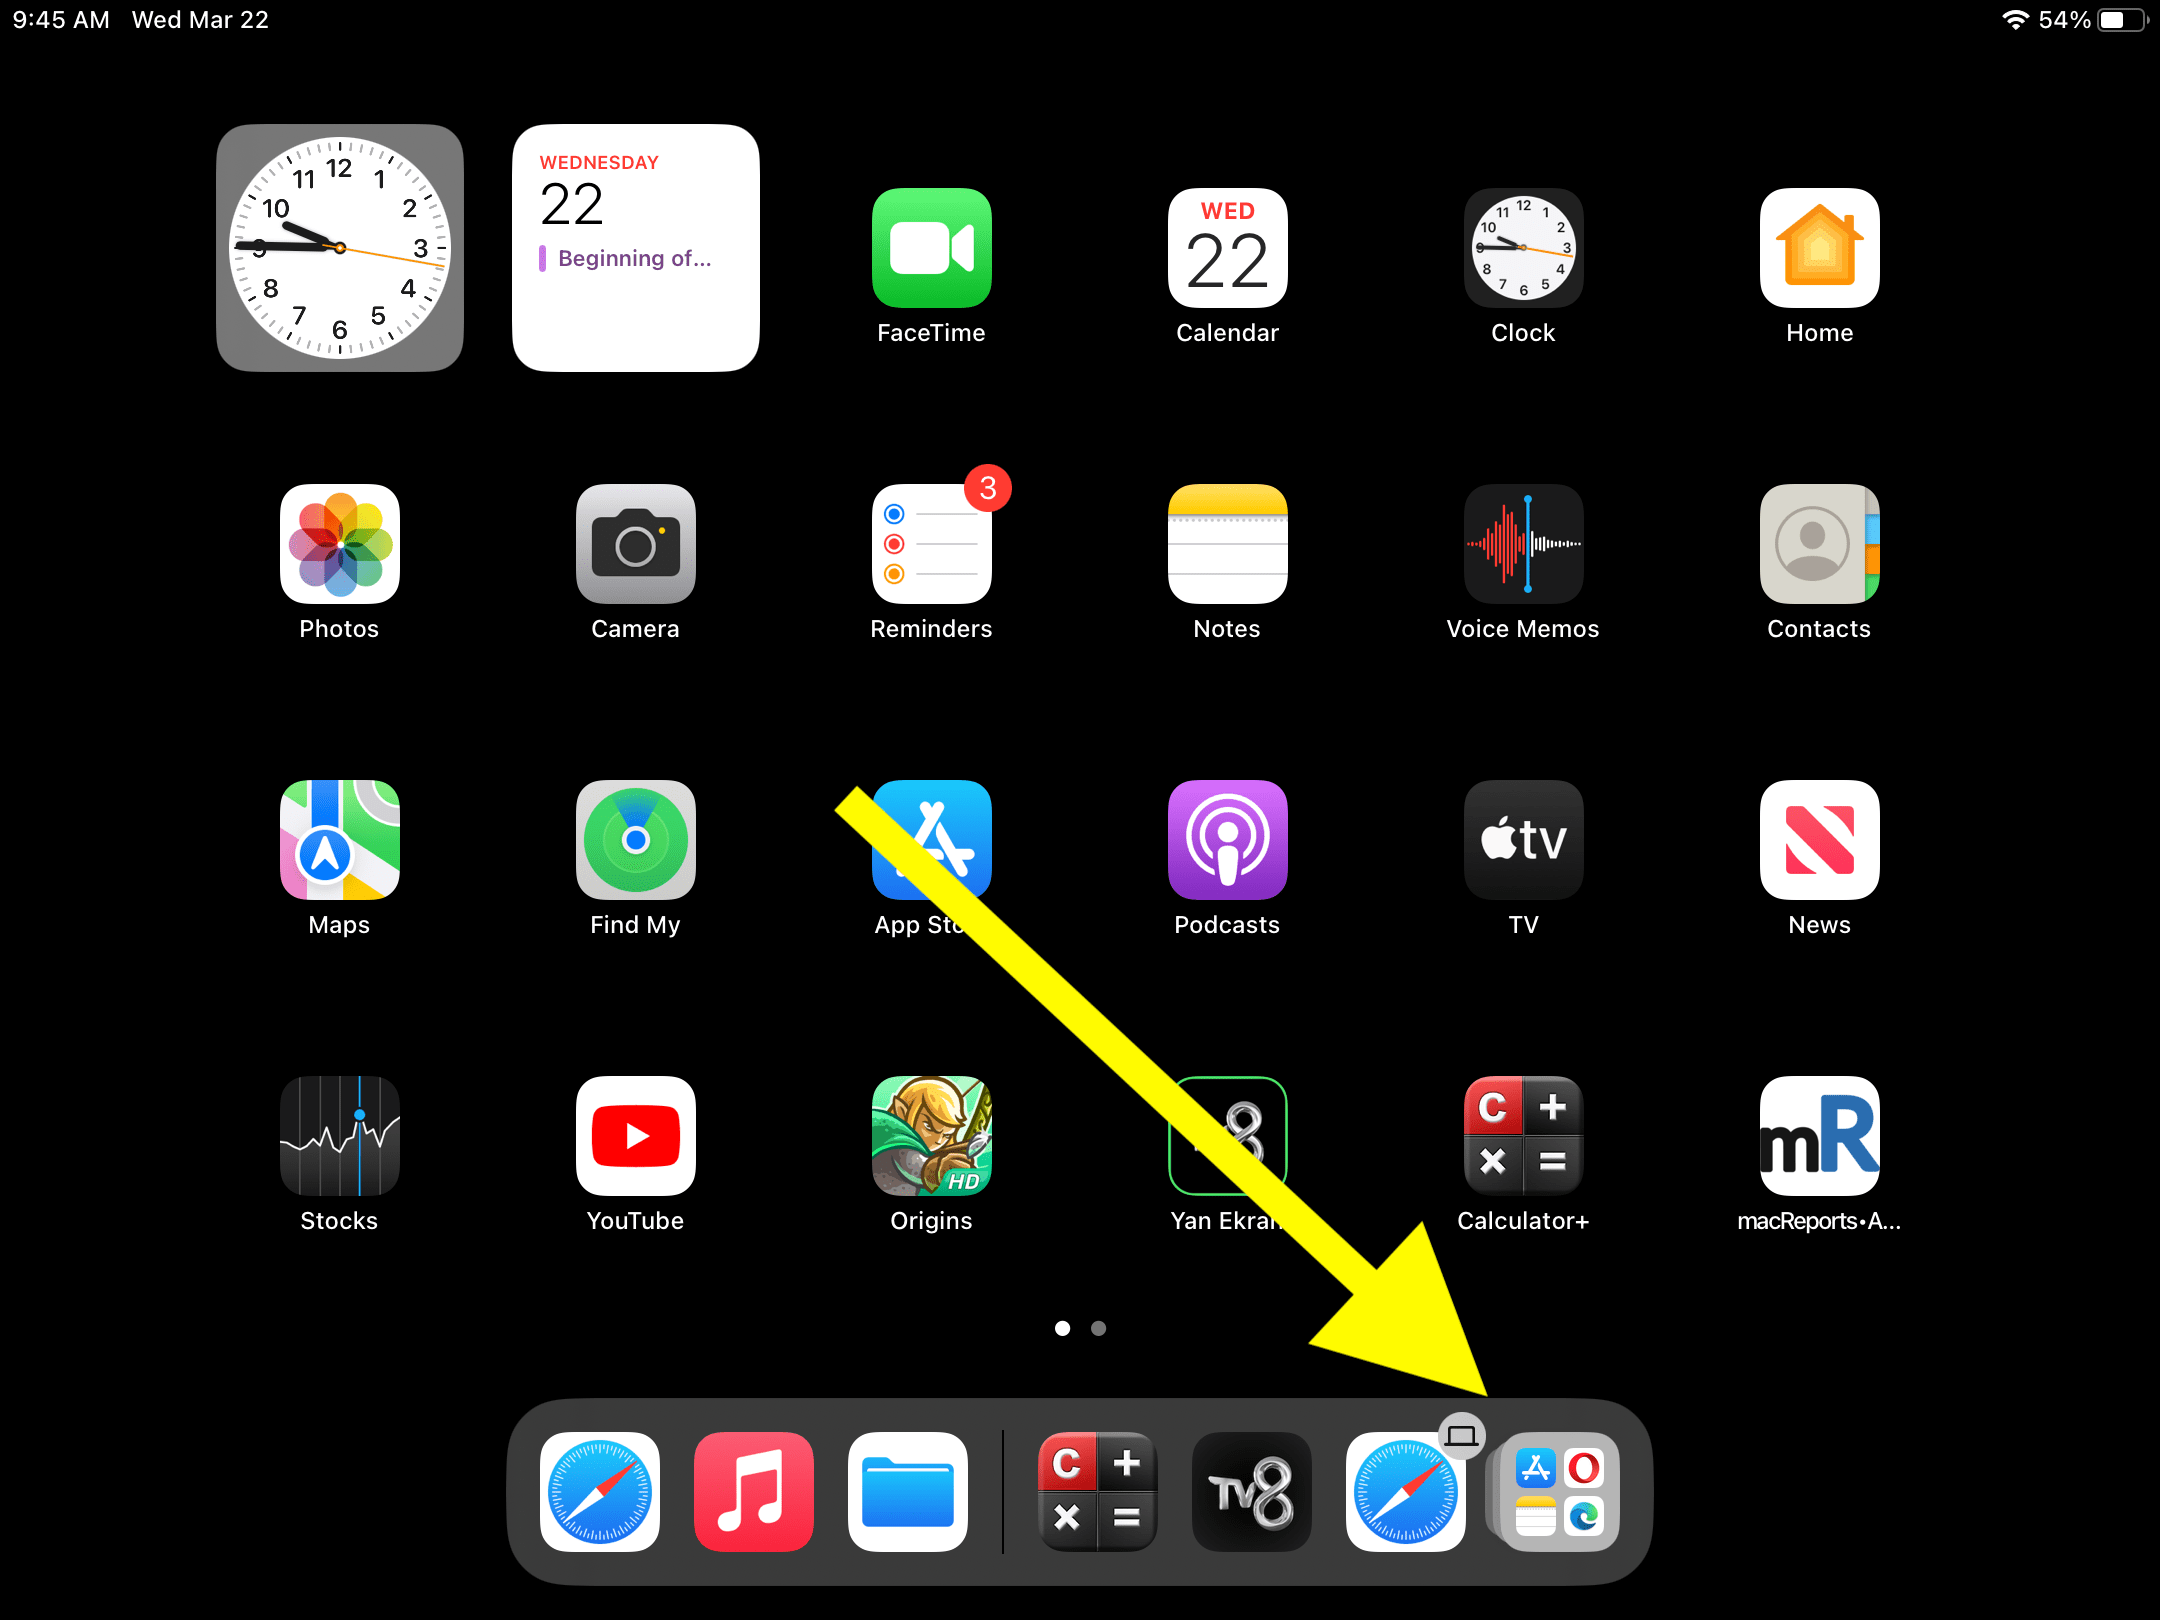 iPad App Library icon in Dock